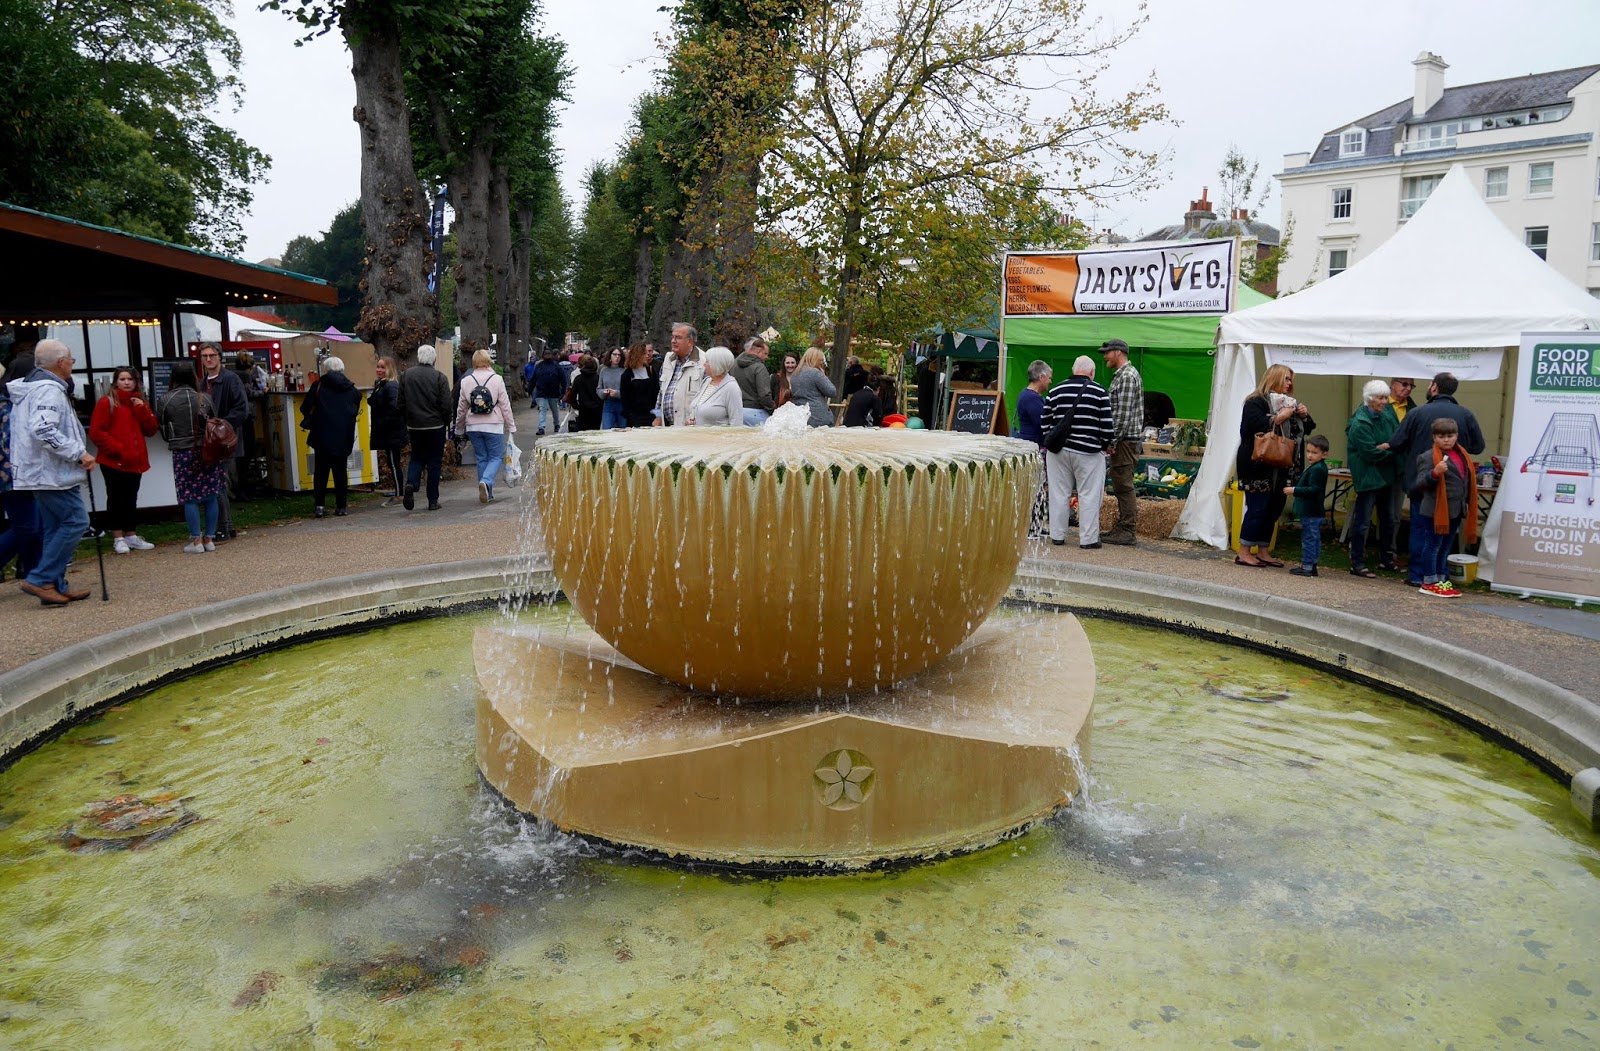 The foutain in Dane John Gardens during the Canterbury Food Festival